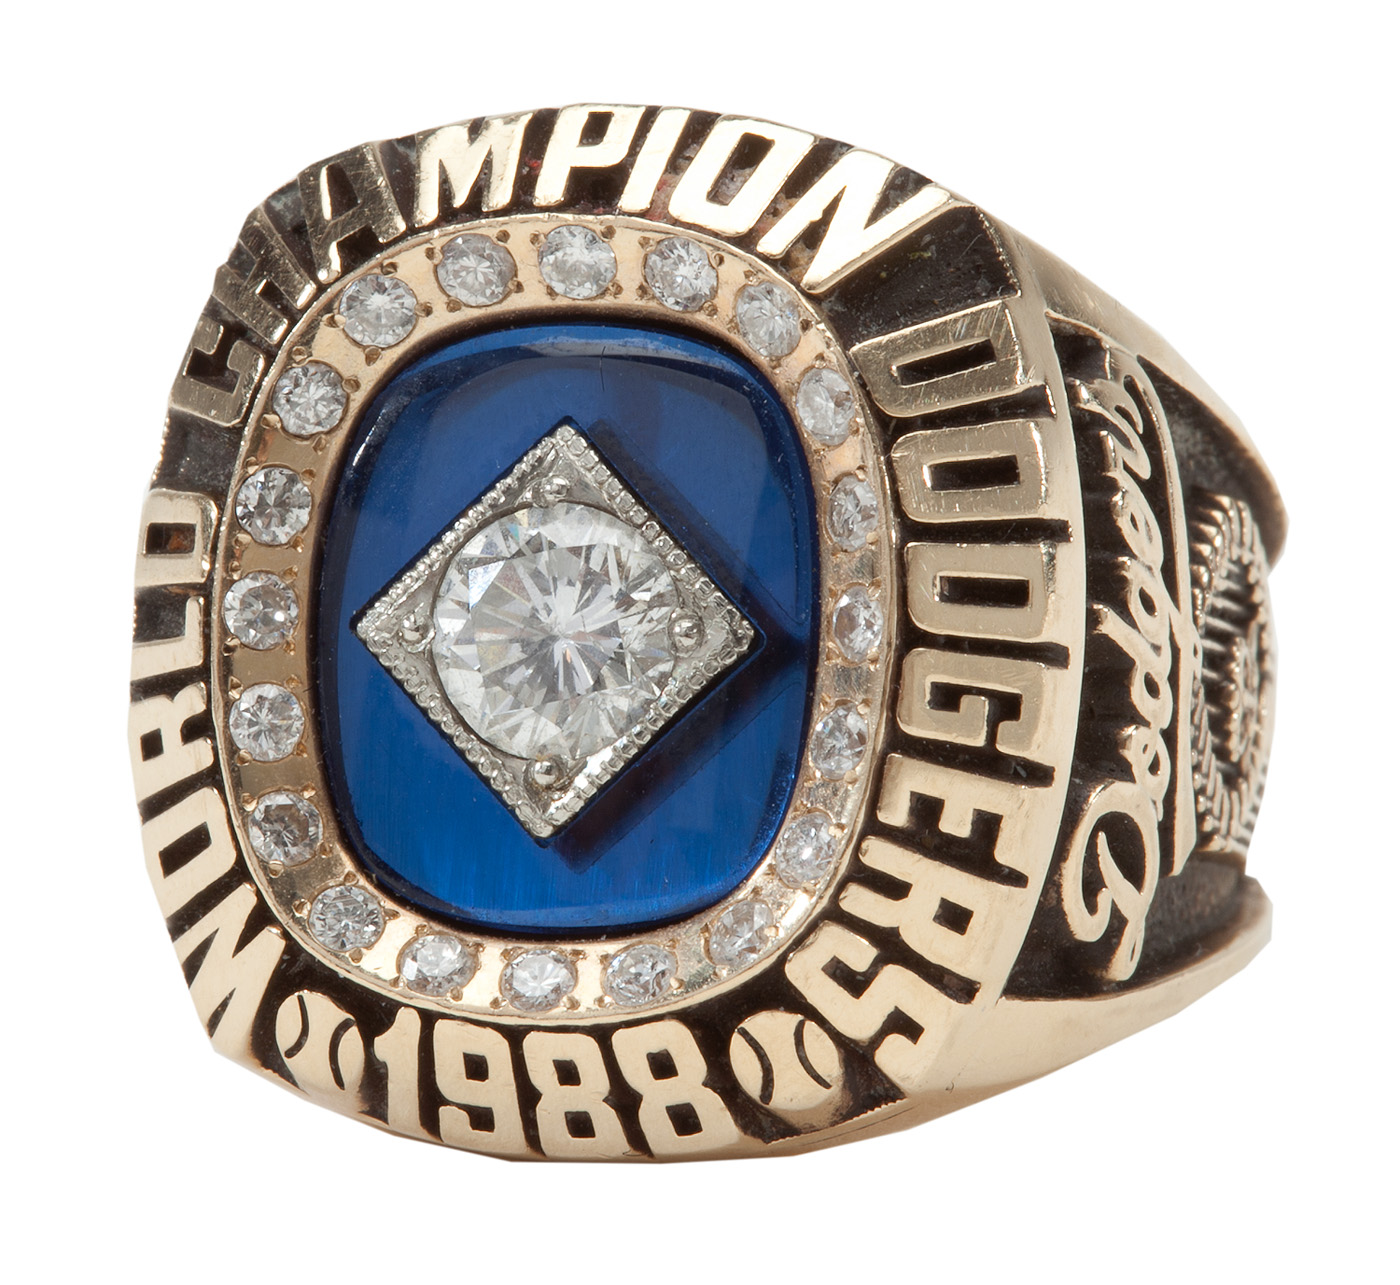 Steve Sax Dodgers World Series Rings and Memorabilia at Auction